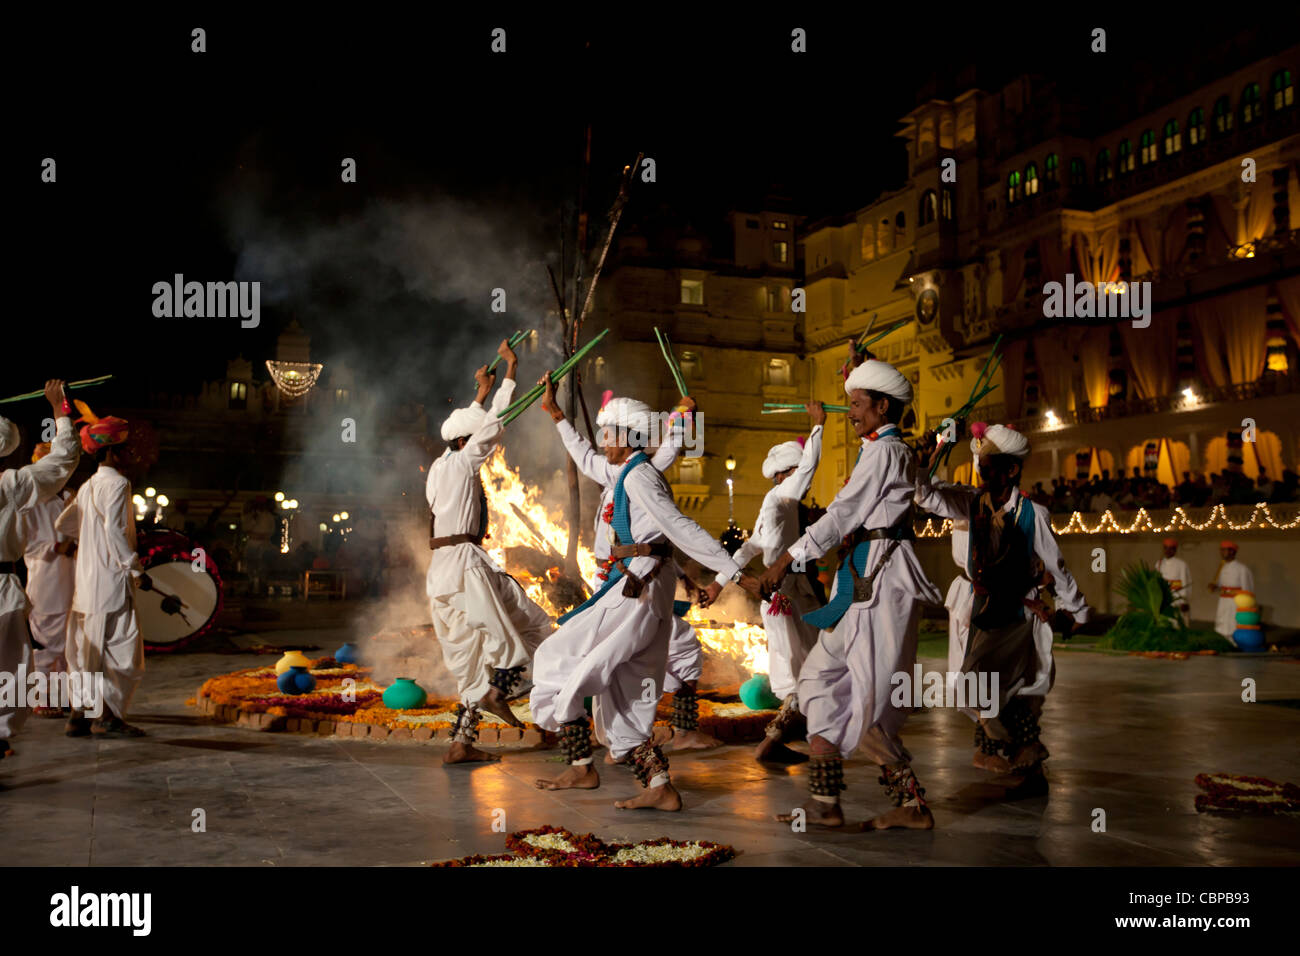 Traditional Ger dancers at The Maharana's City Palace for Hindu Holi Fire Festival, Udaipur, Rajasthan, India Stock Photo